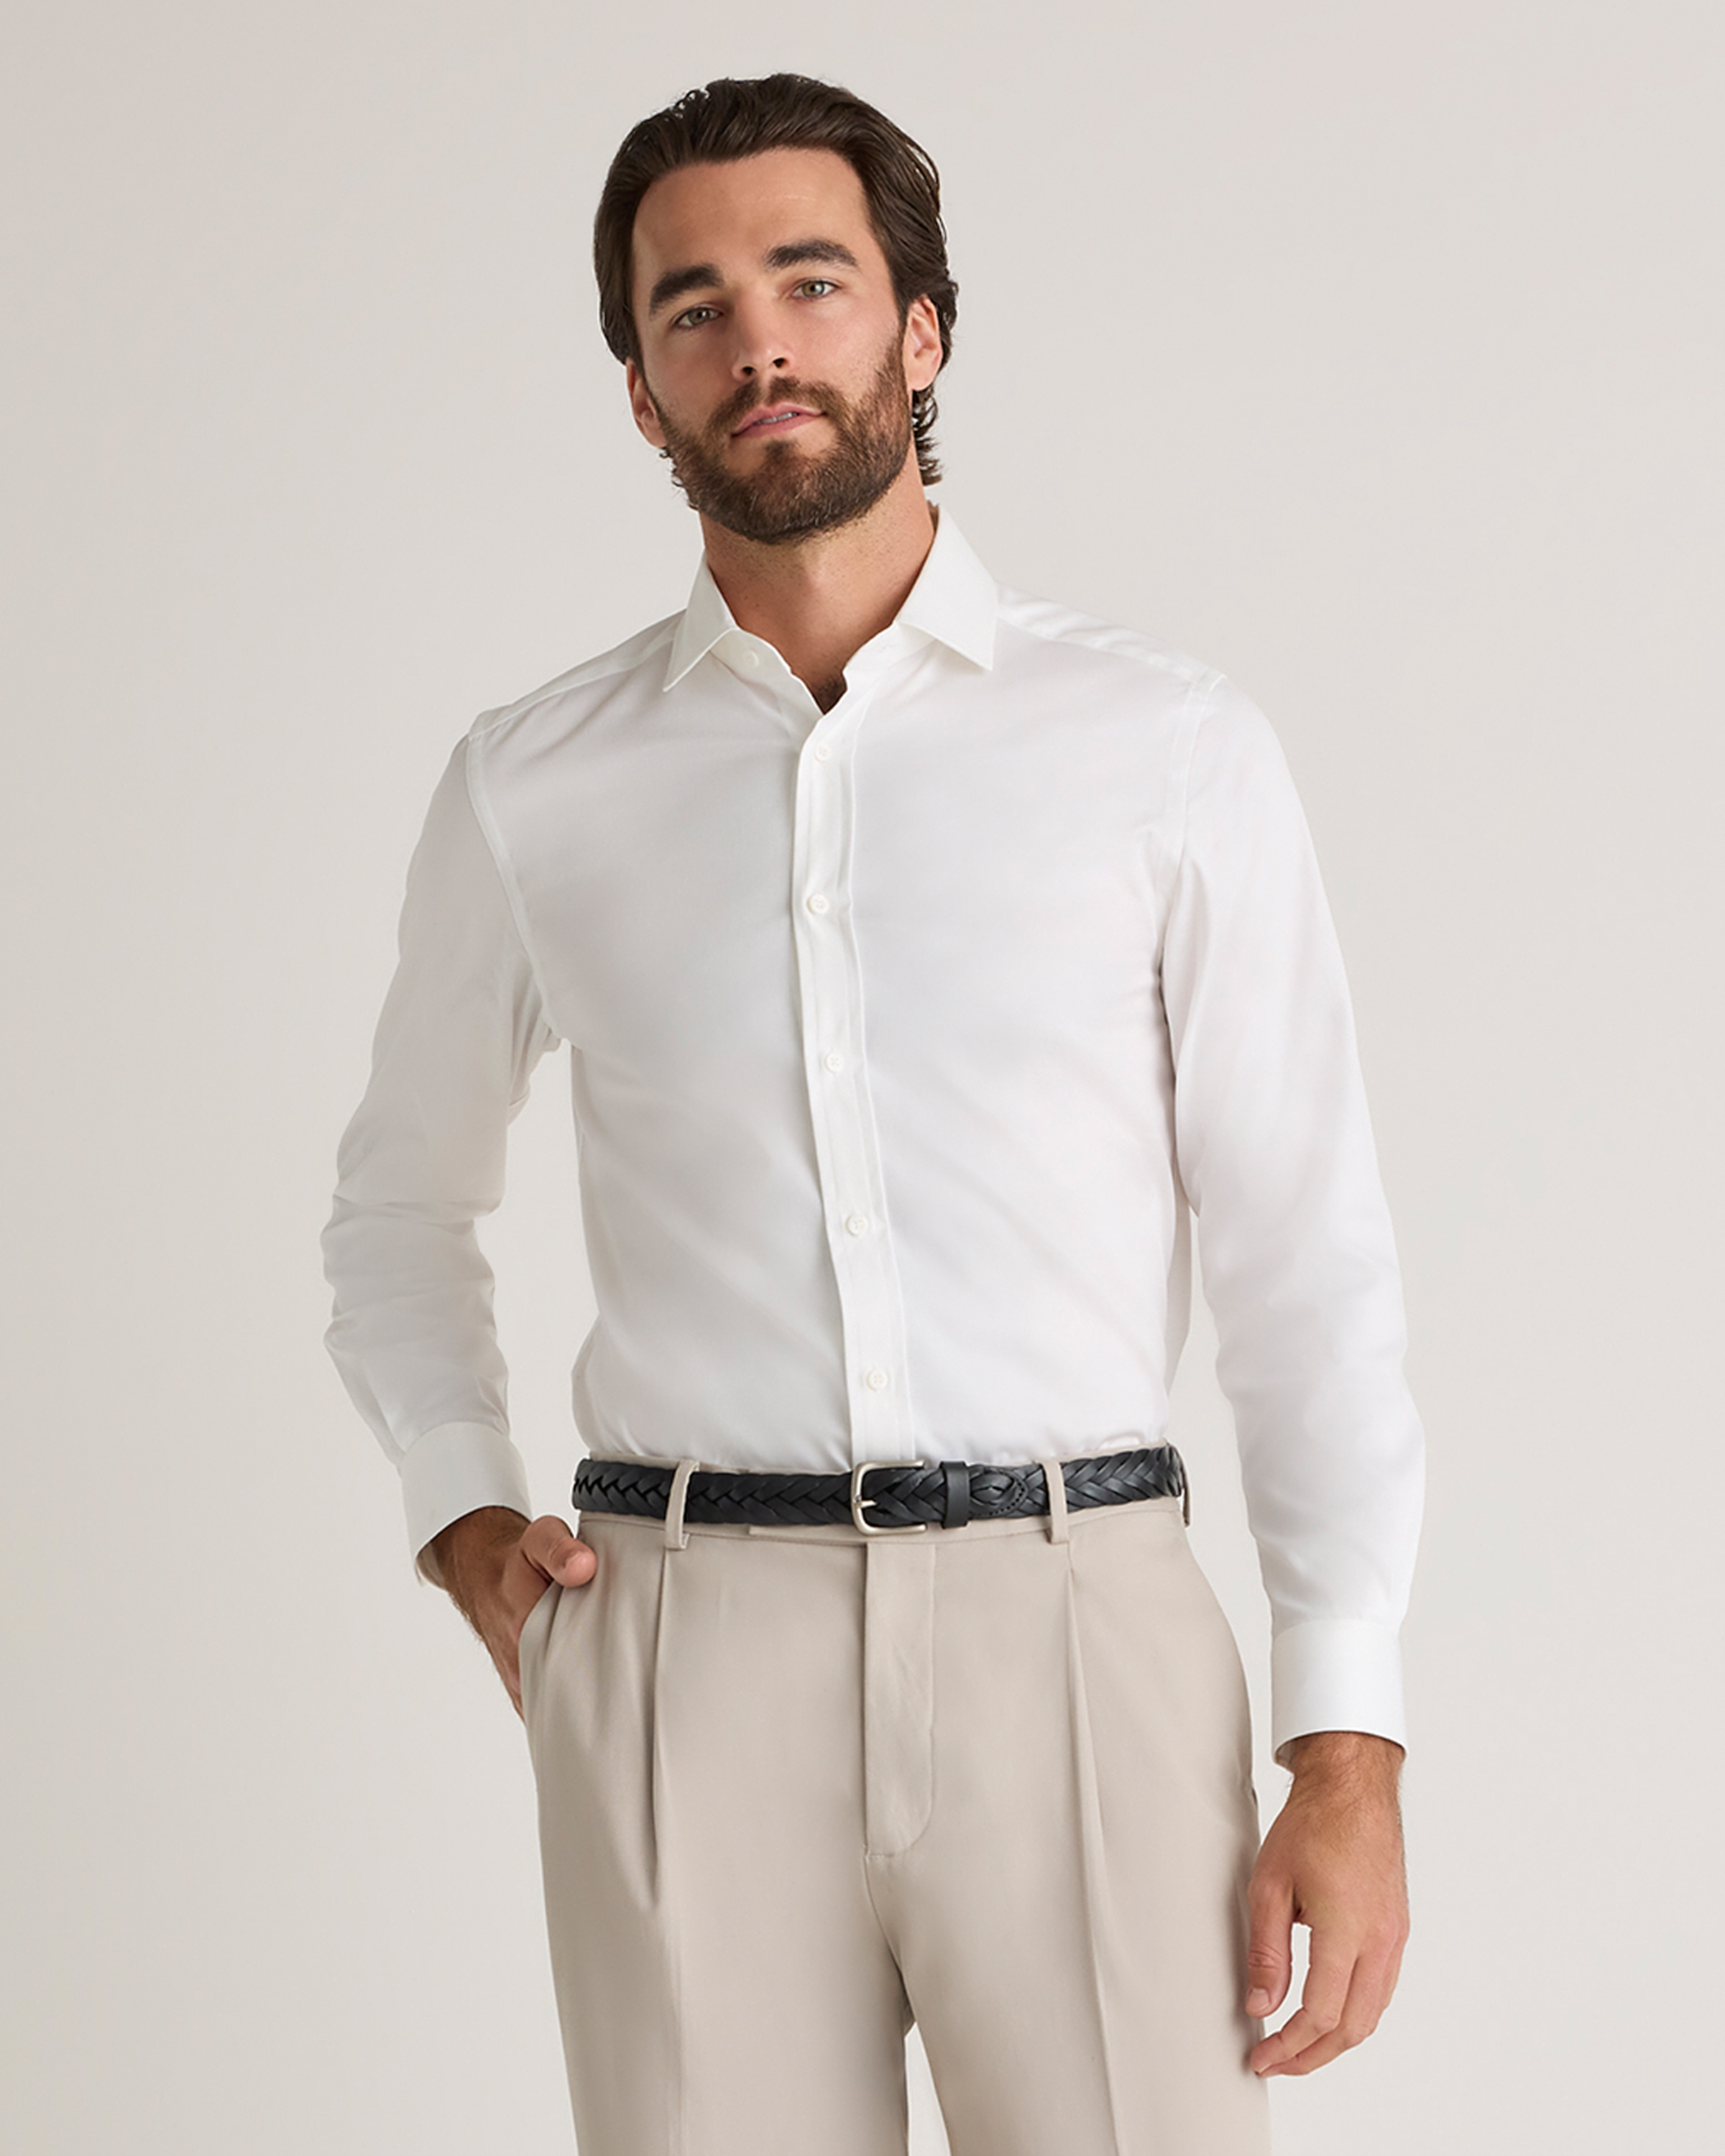 Quince Men's Stretch Twill Dress Shirt In White